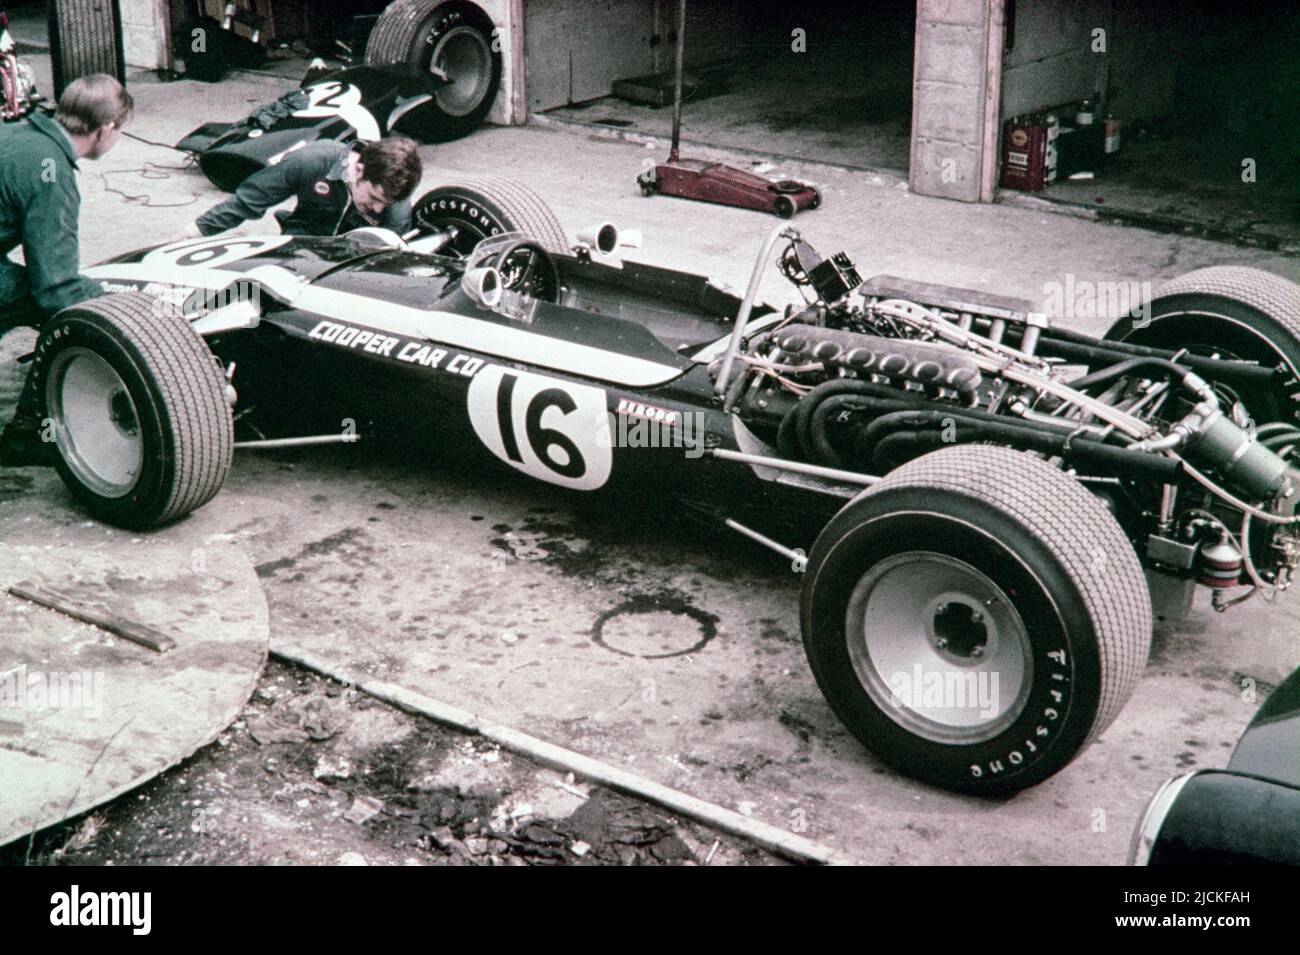 1968 British Formula 1 Grand Prix at Brands Hatch. Race number 16, a Cooper T86B-BRM, driven on the day by Robin Widdows, for the Cooper car Company Team. Stock Photo